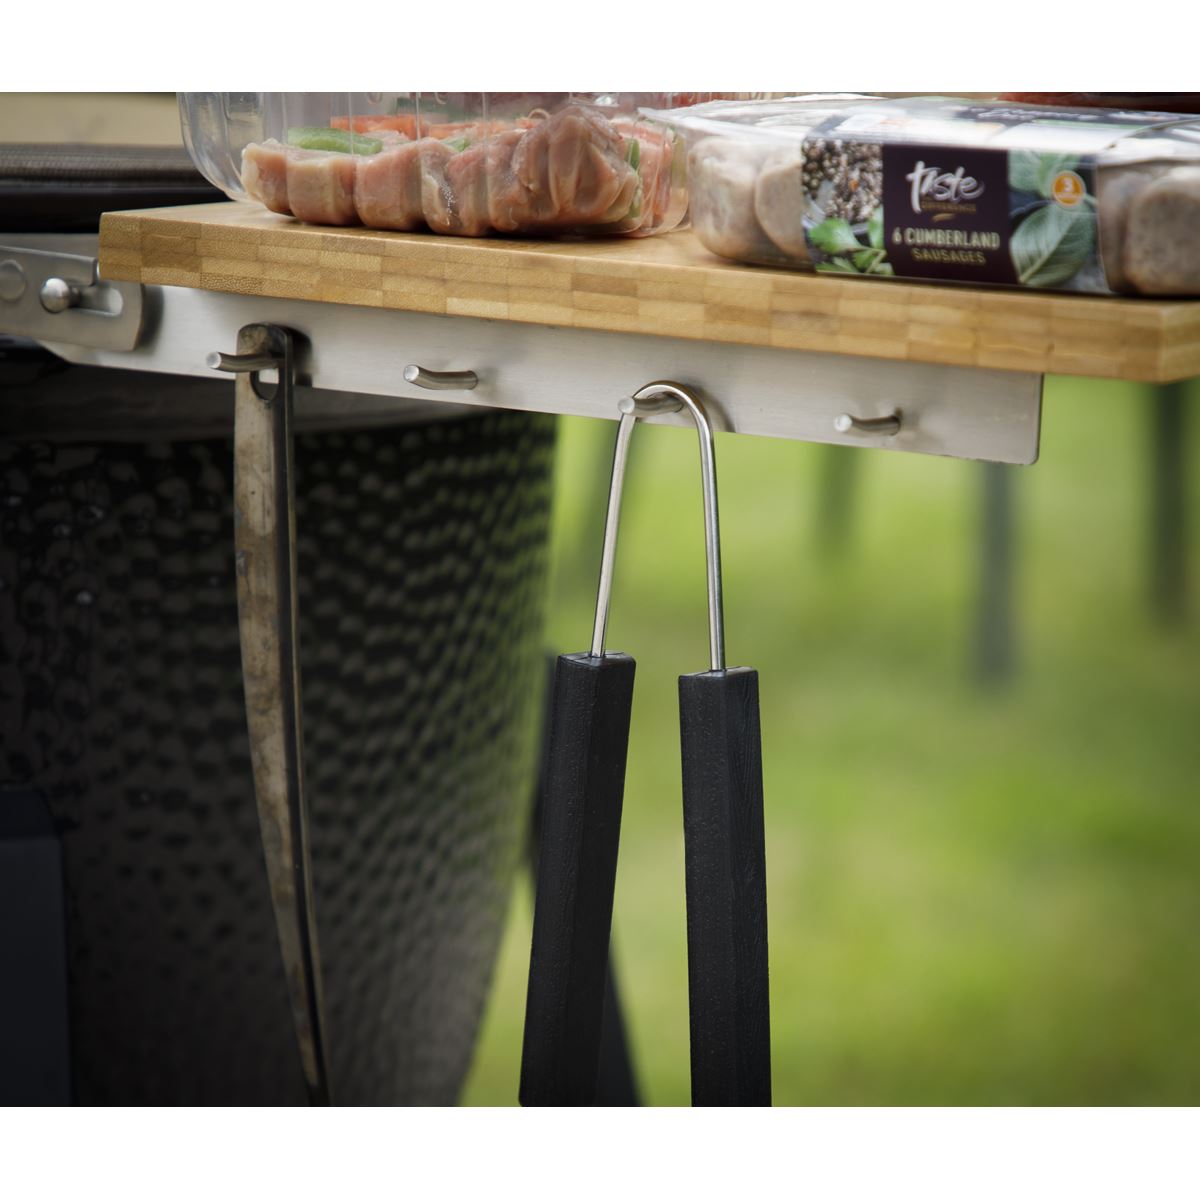 Dellonda Deluxe 22"(56cm) Ceramic Kamado Style BBQ Grill/Oven/Smoker, Supplied with Wheeled Stand